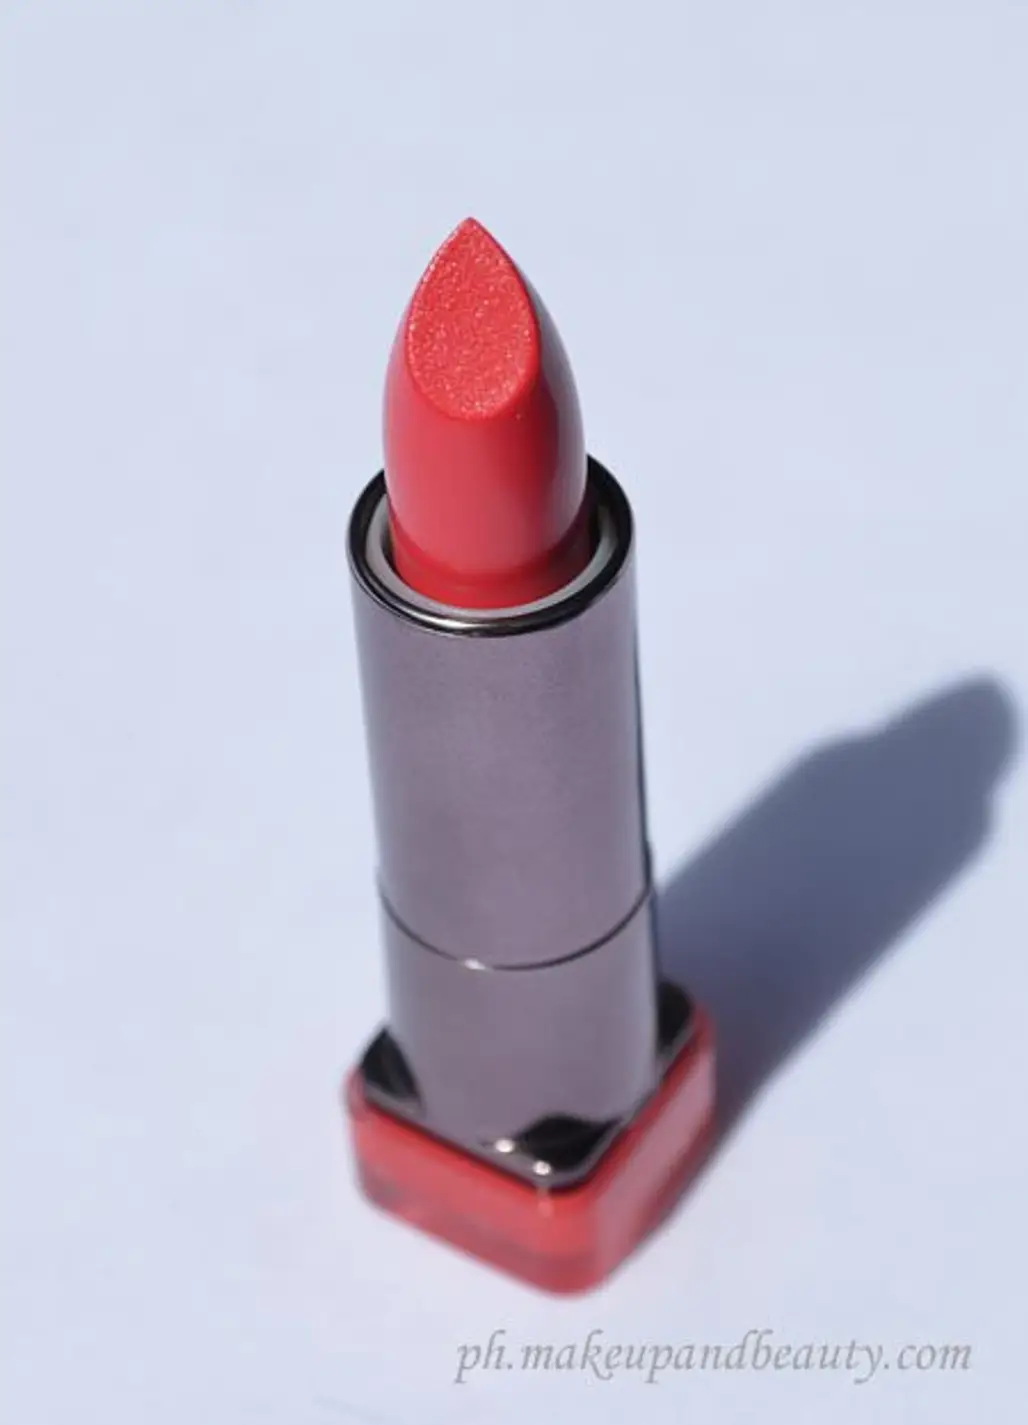 Covergirl Lip Perfection Lipstick in Flame